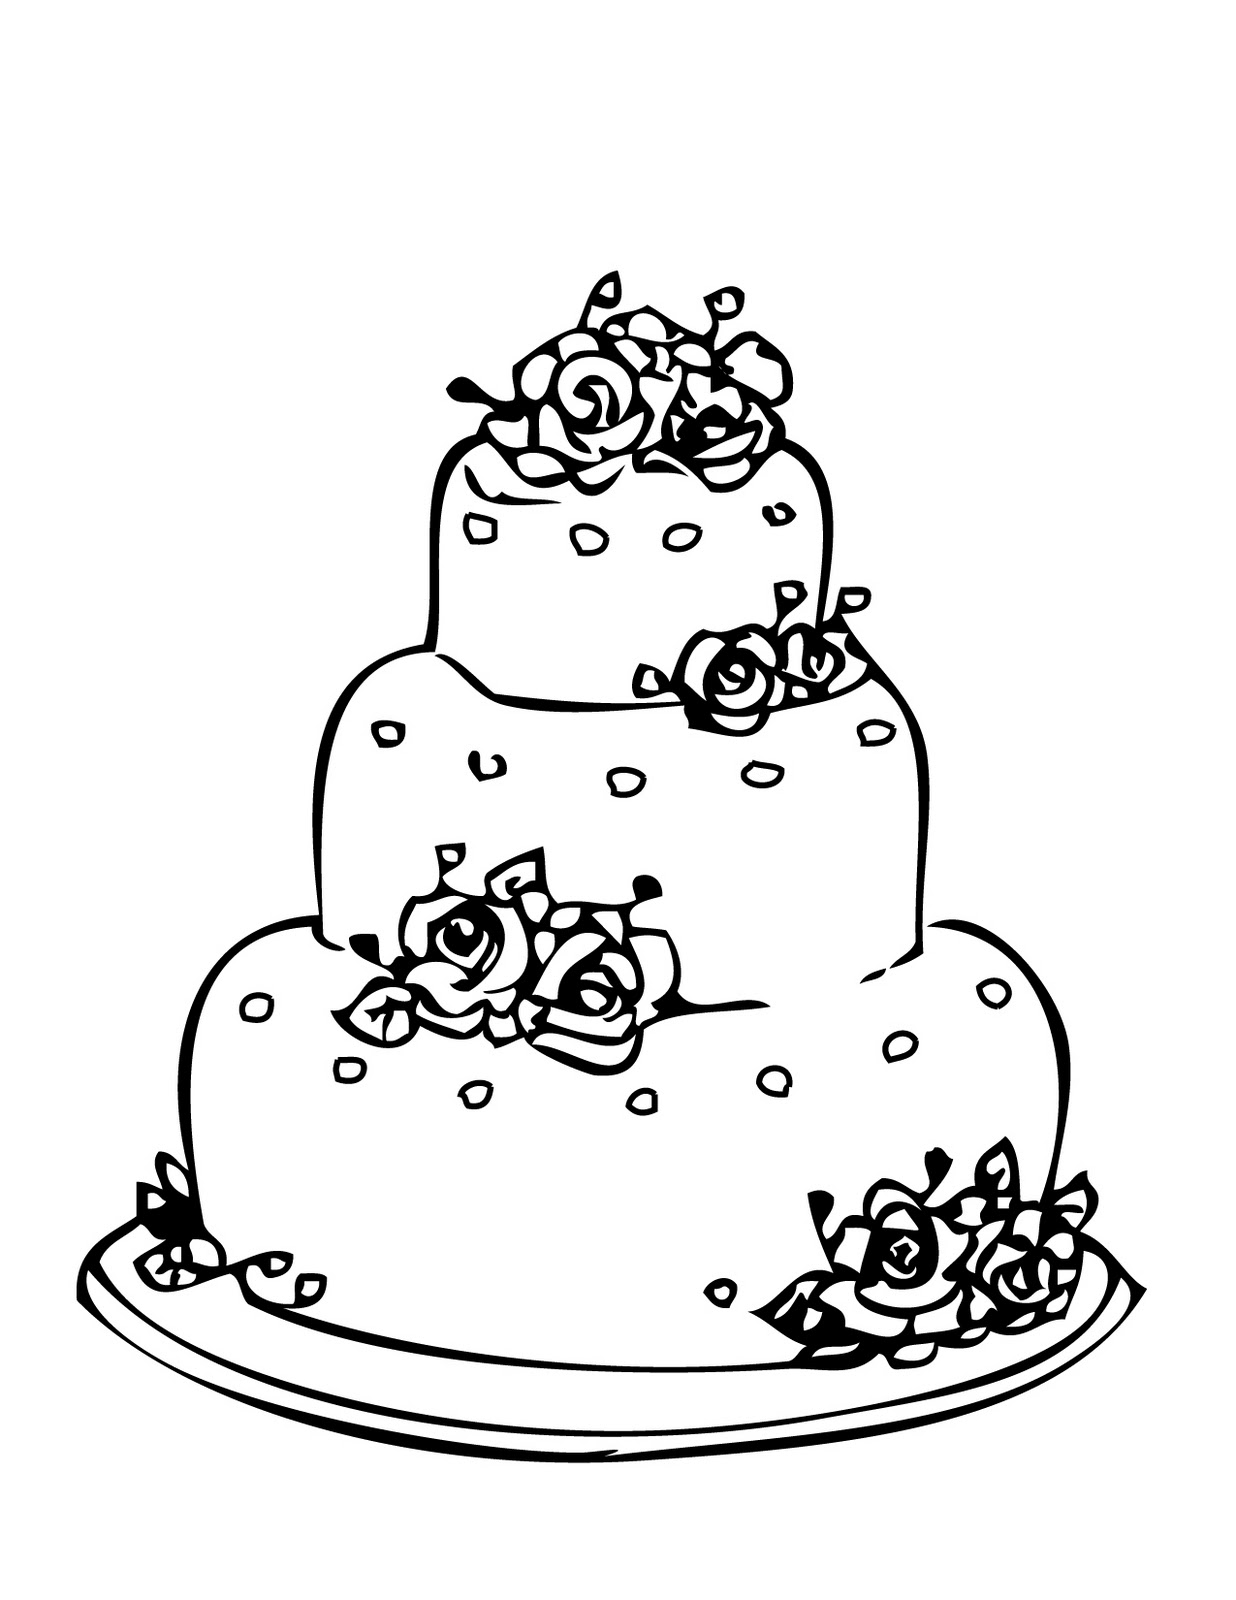 halloween sheet cakes The Wedding Cakes Coloring Sheet for drawing by kids